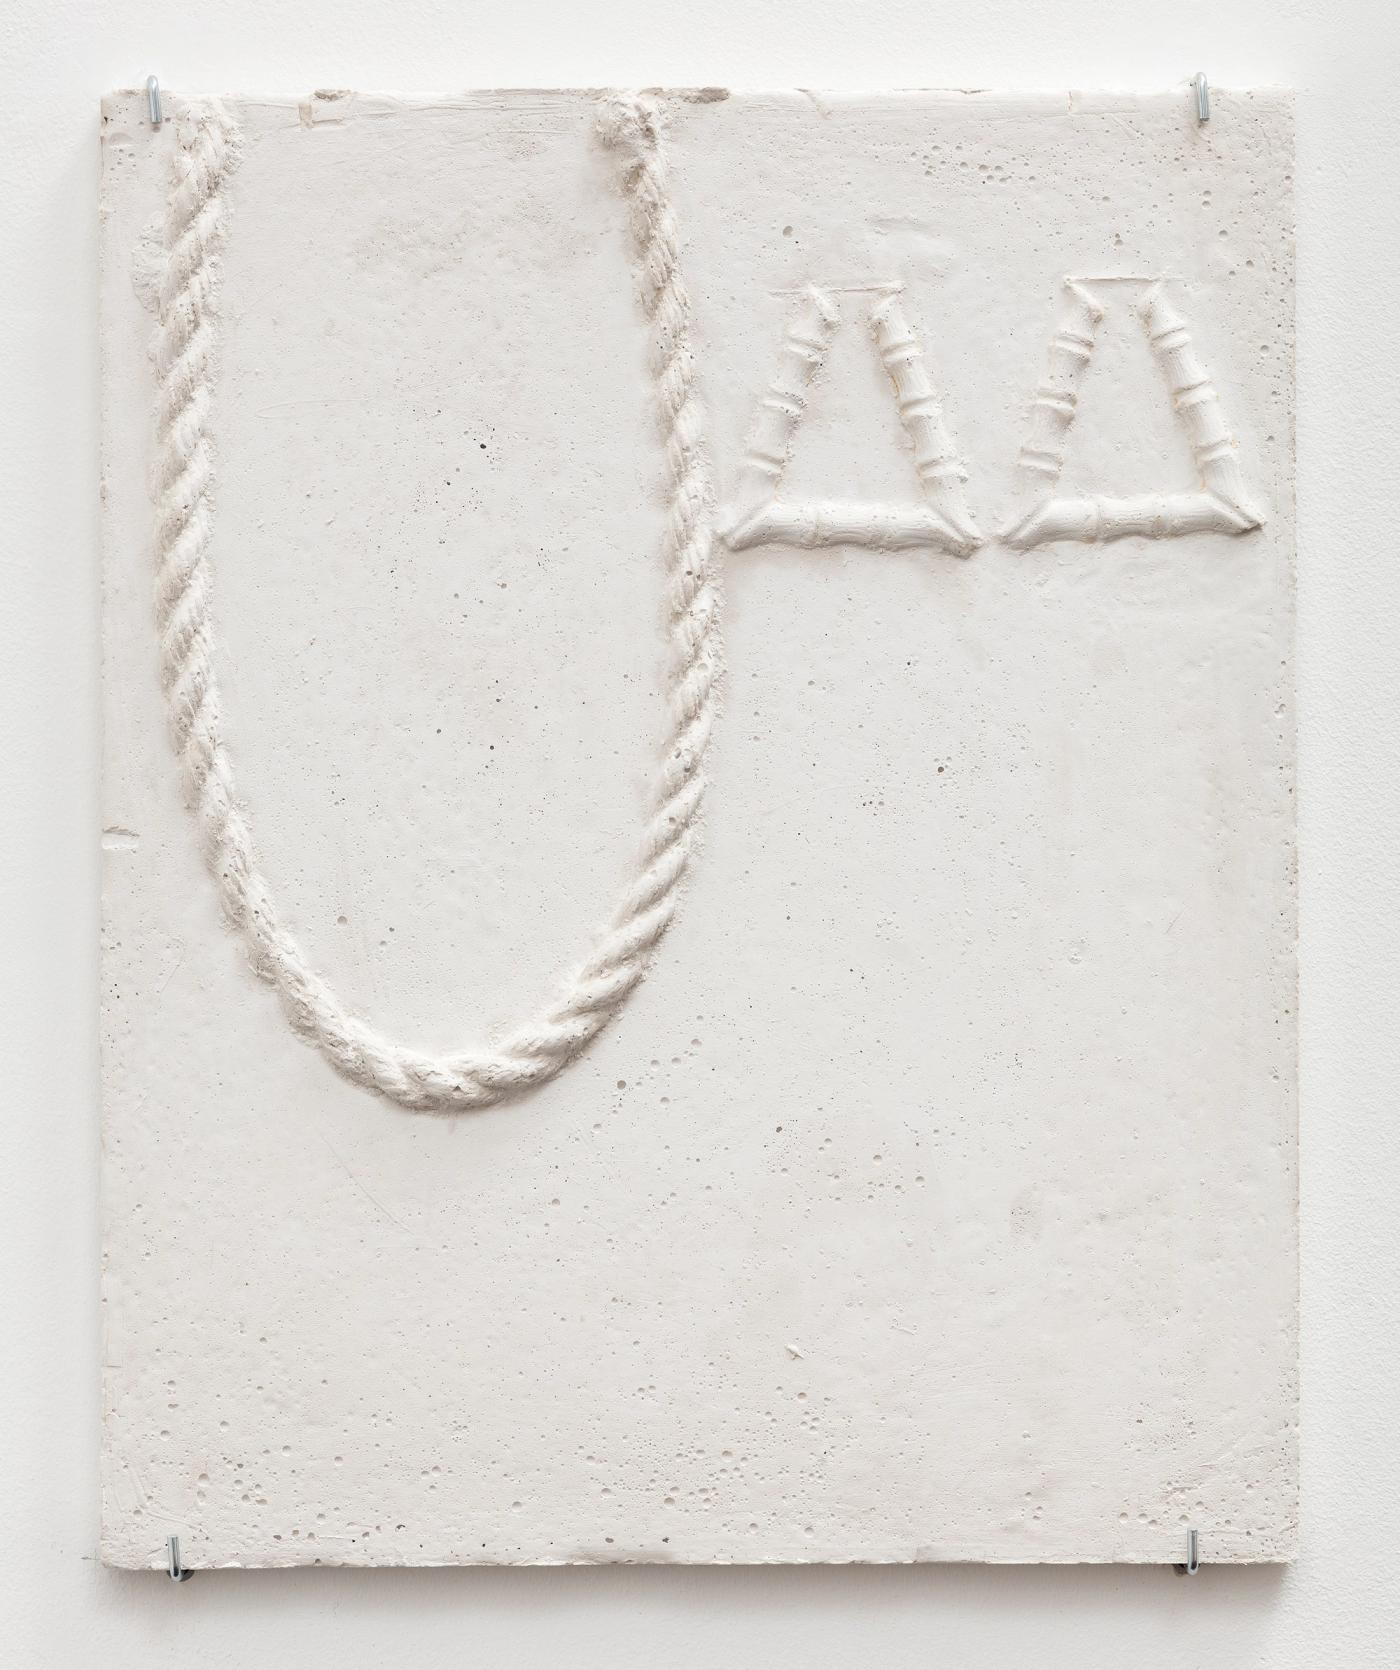 Image of Rope Chain with Triangle Bamboo Earrings Relief, 2018: Plaster